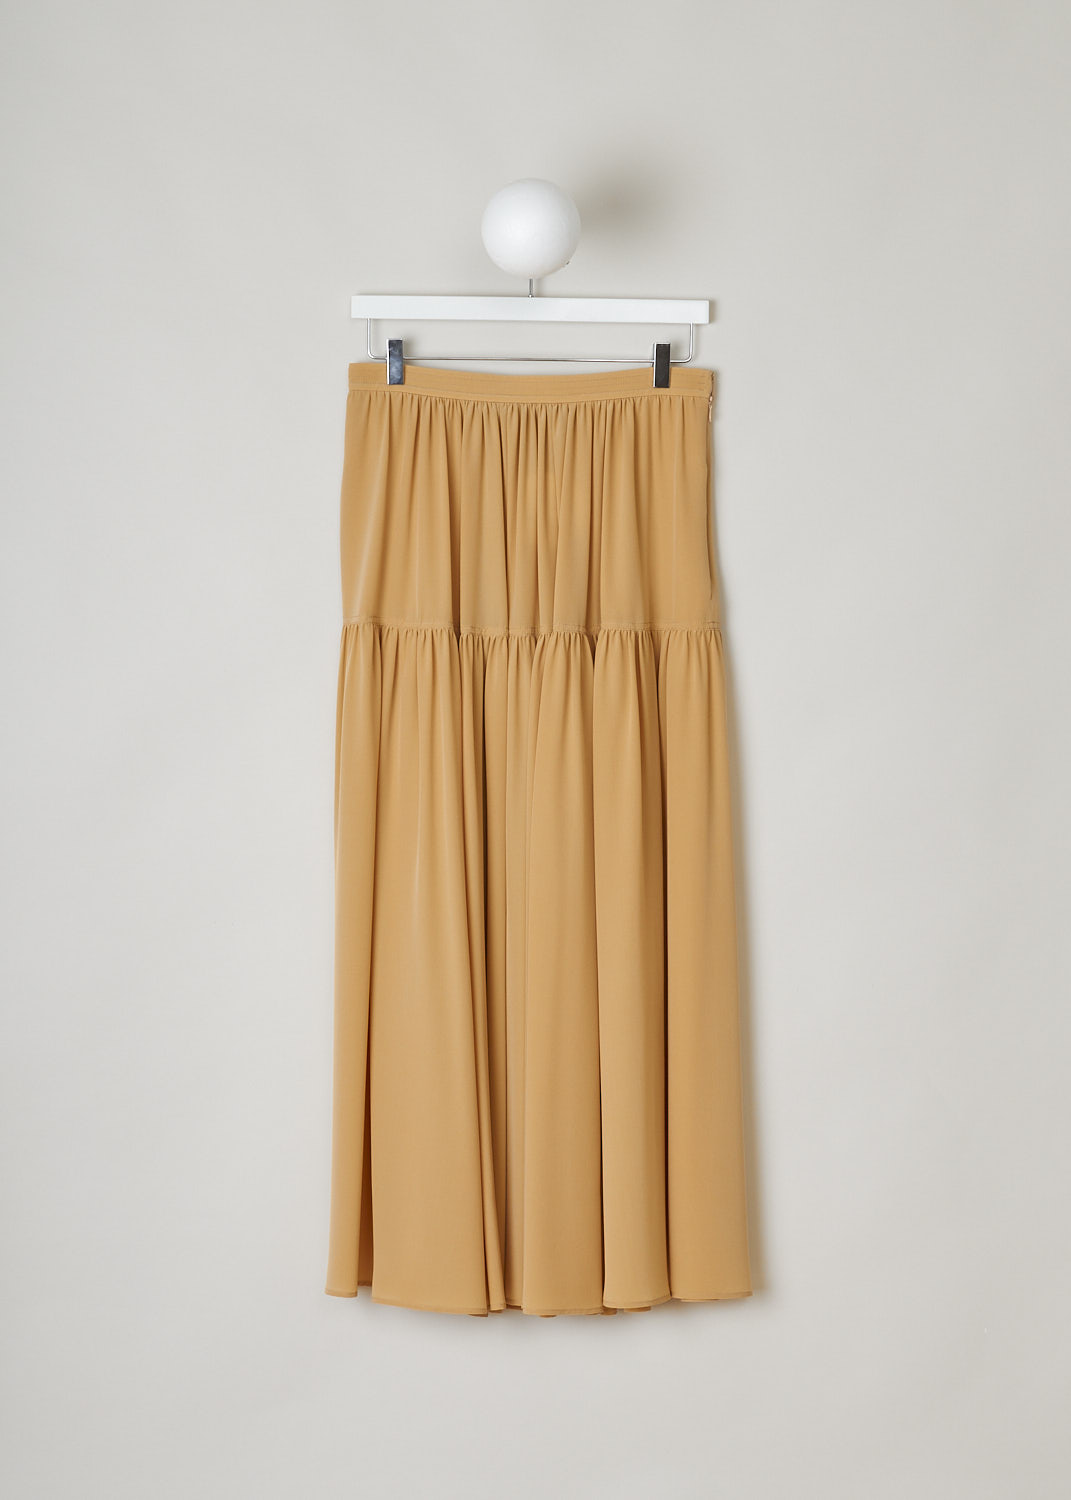 CHLOÃ‰, PEARL BEIGE TIERED MAXI SKIRT, CHC22UJU03004278, Beige, Front, This pearl beige tiered pleated maxi skirt has a narrow waistband. A concealed side zip functions as the closure option.
 
